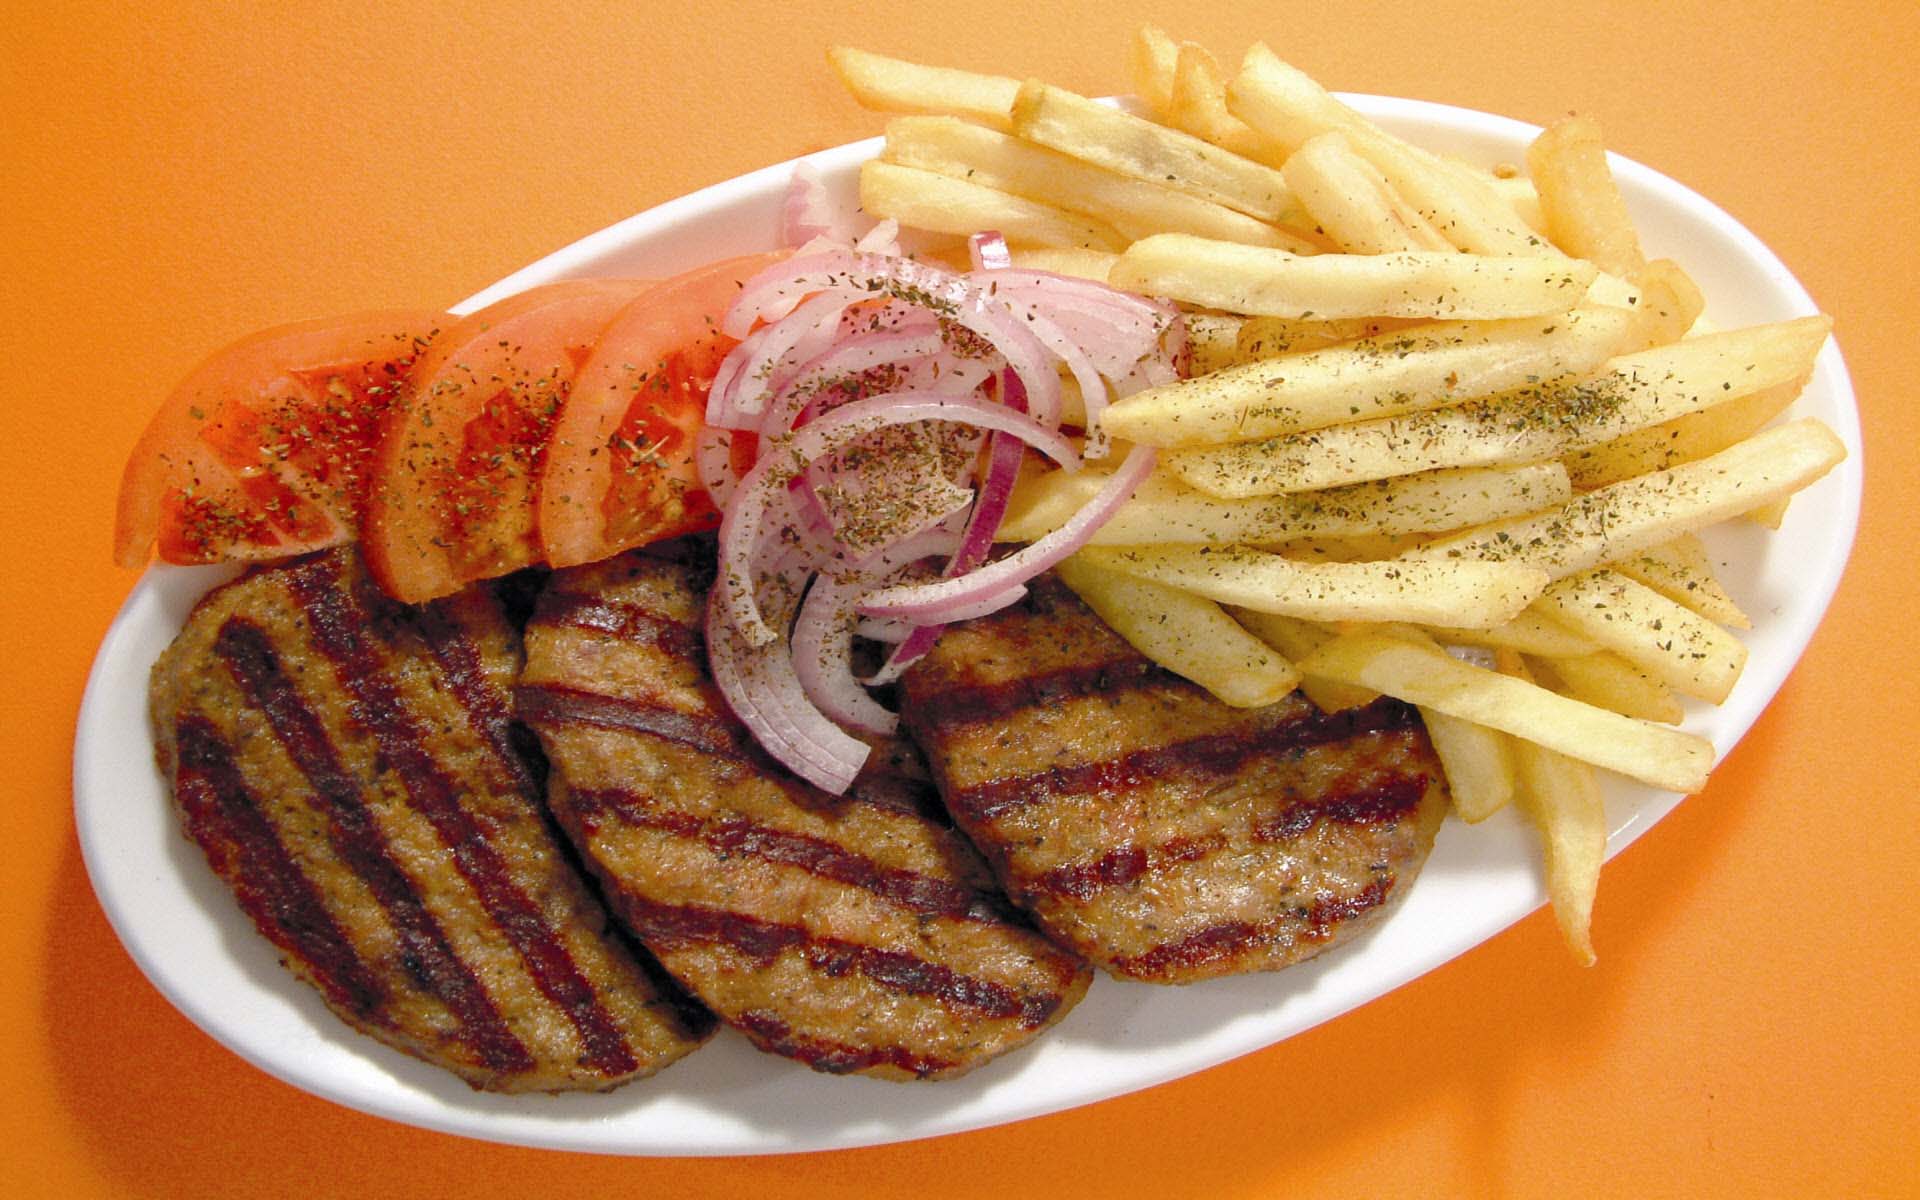 Delicious pork burger with french fries and toppings.